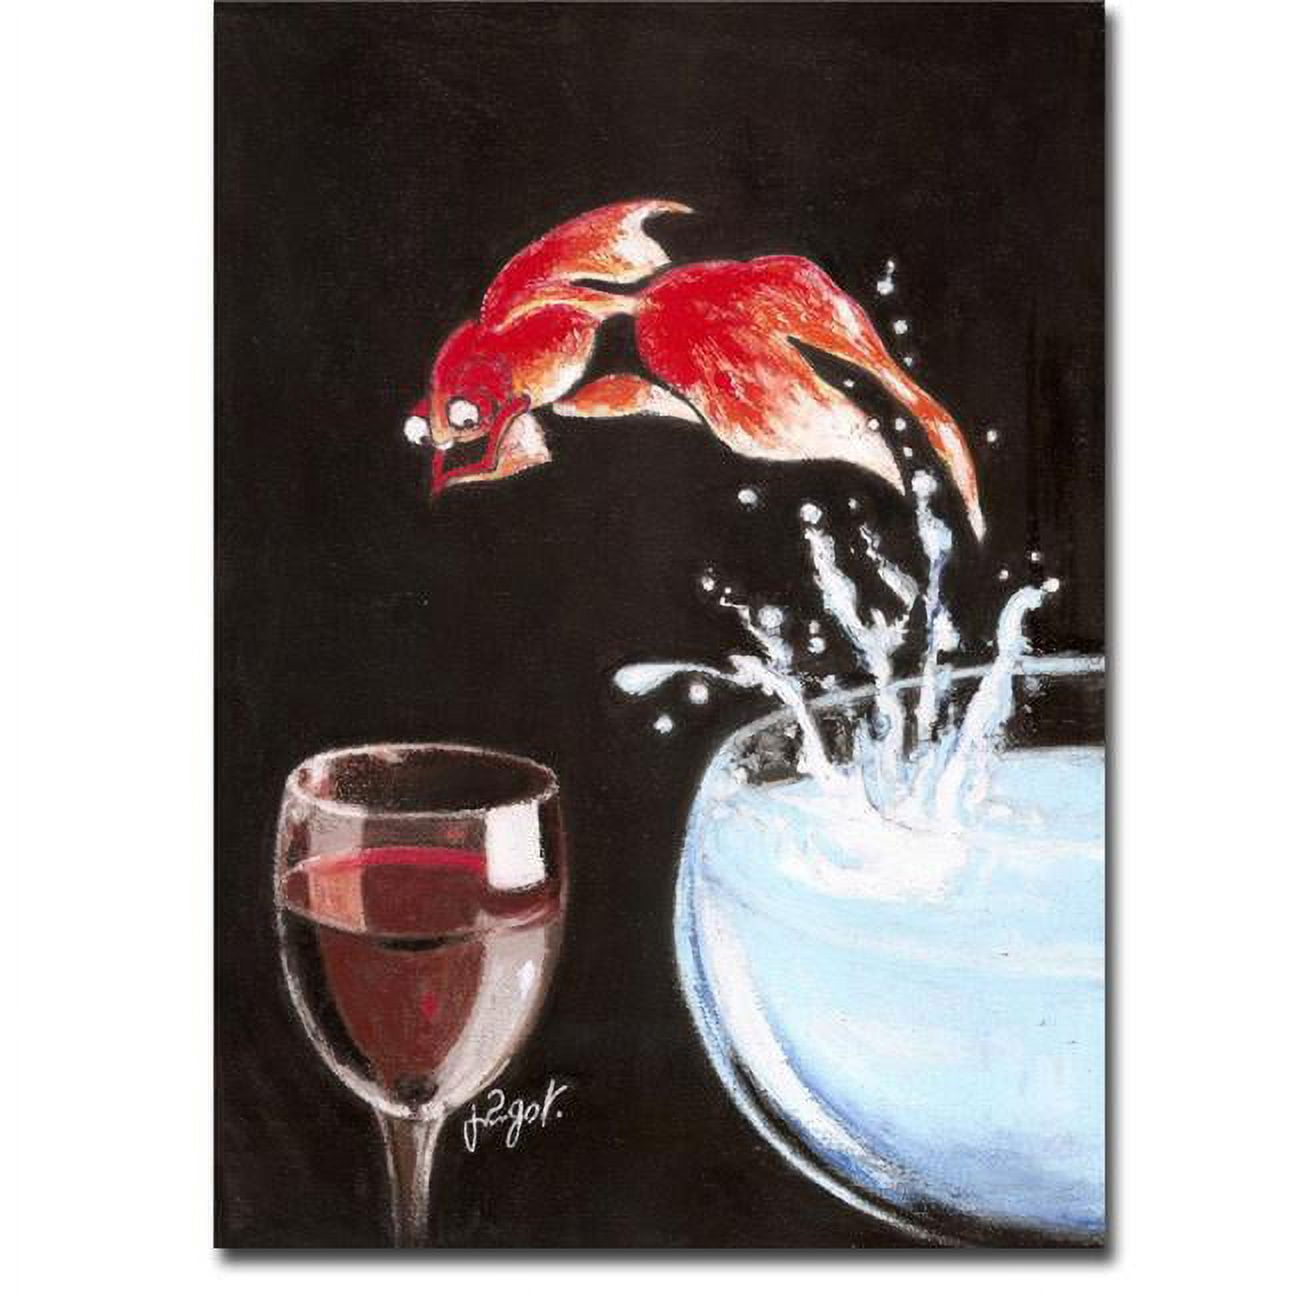 1216745tg Heureux Poisson Happy As A Fish By Jean-pierre Got Premium Gallery-wrapped Canvas Giclee Art - 16 X 12 In.